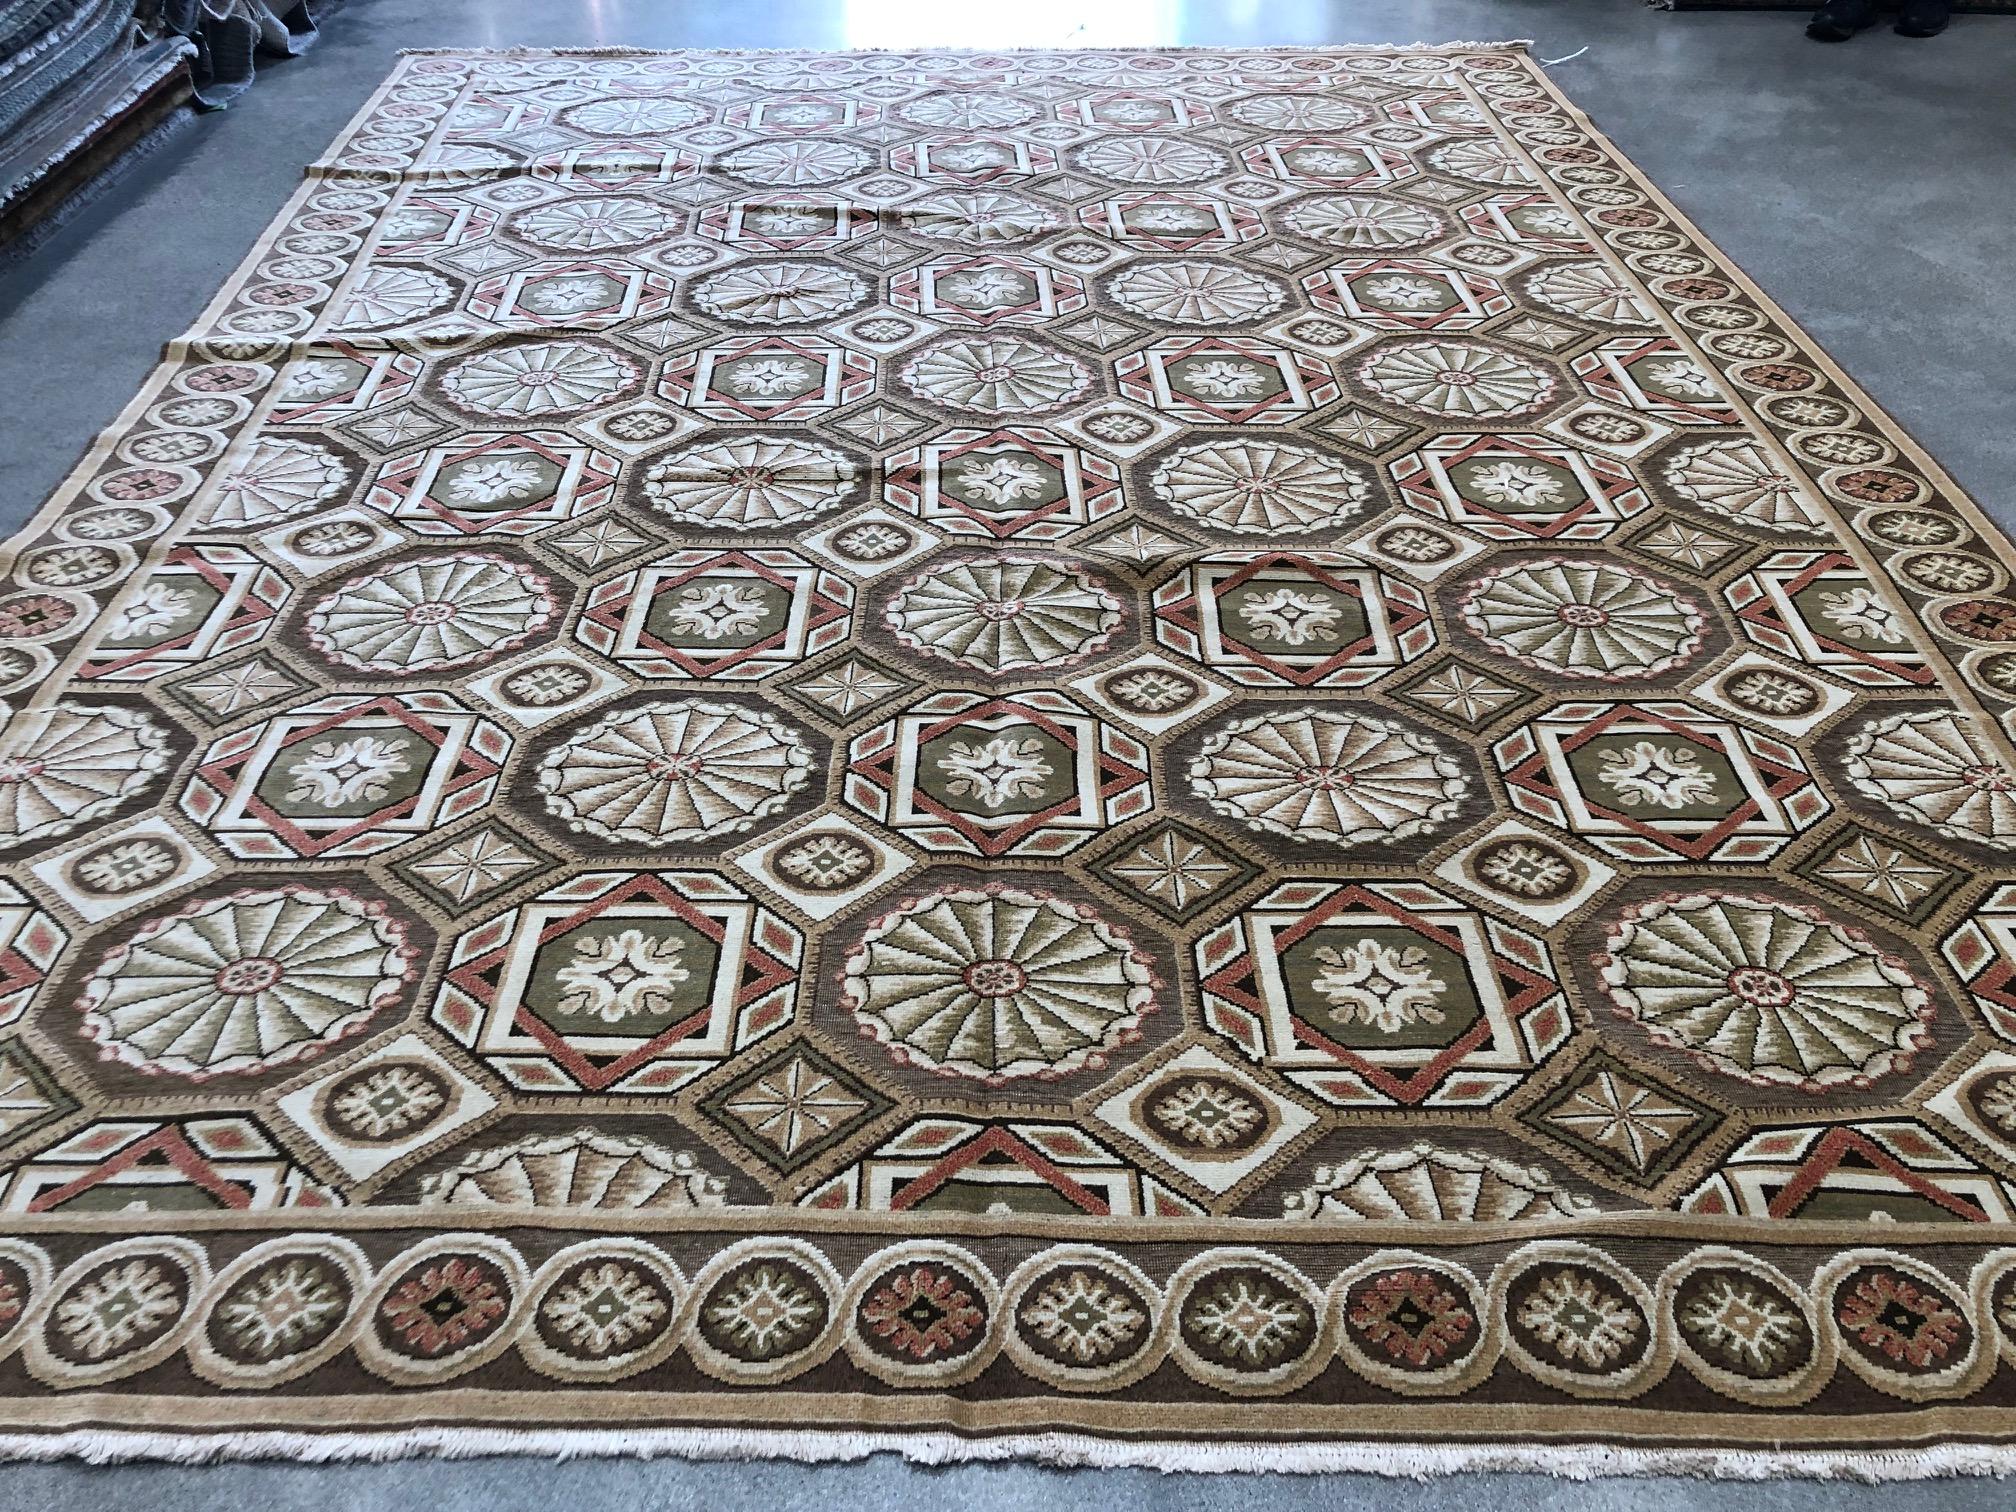 The eye-catching geometric all-over pattern within a center panel/frame traditional layout makes this European Design rug stand out. Brown, green, ivory, rust and taupe coloring pairs well with wood and metallic finishes in the living room, dining